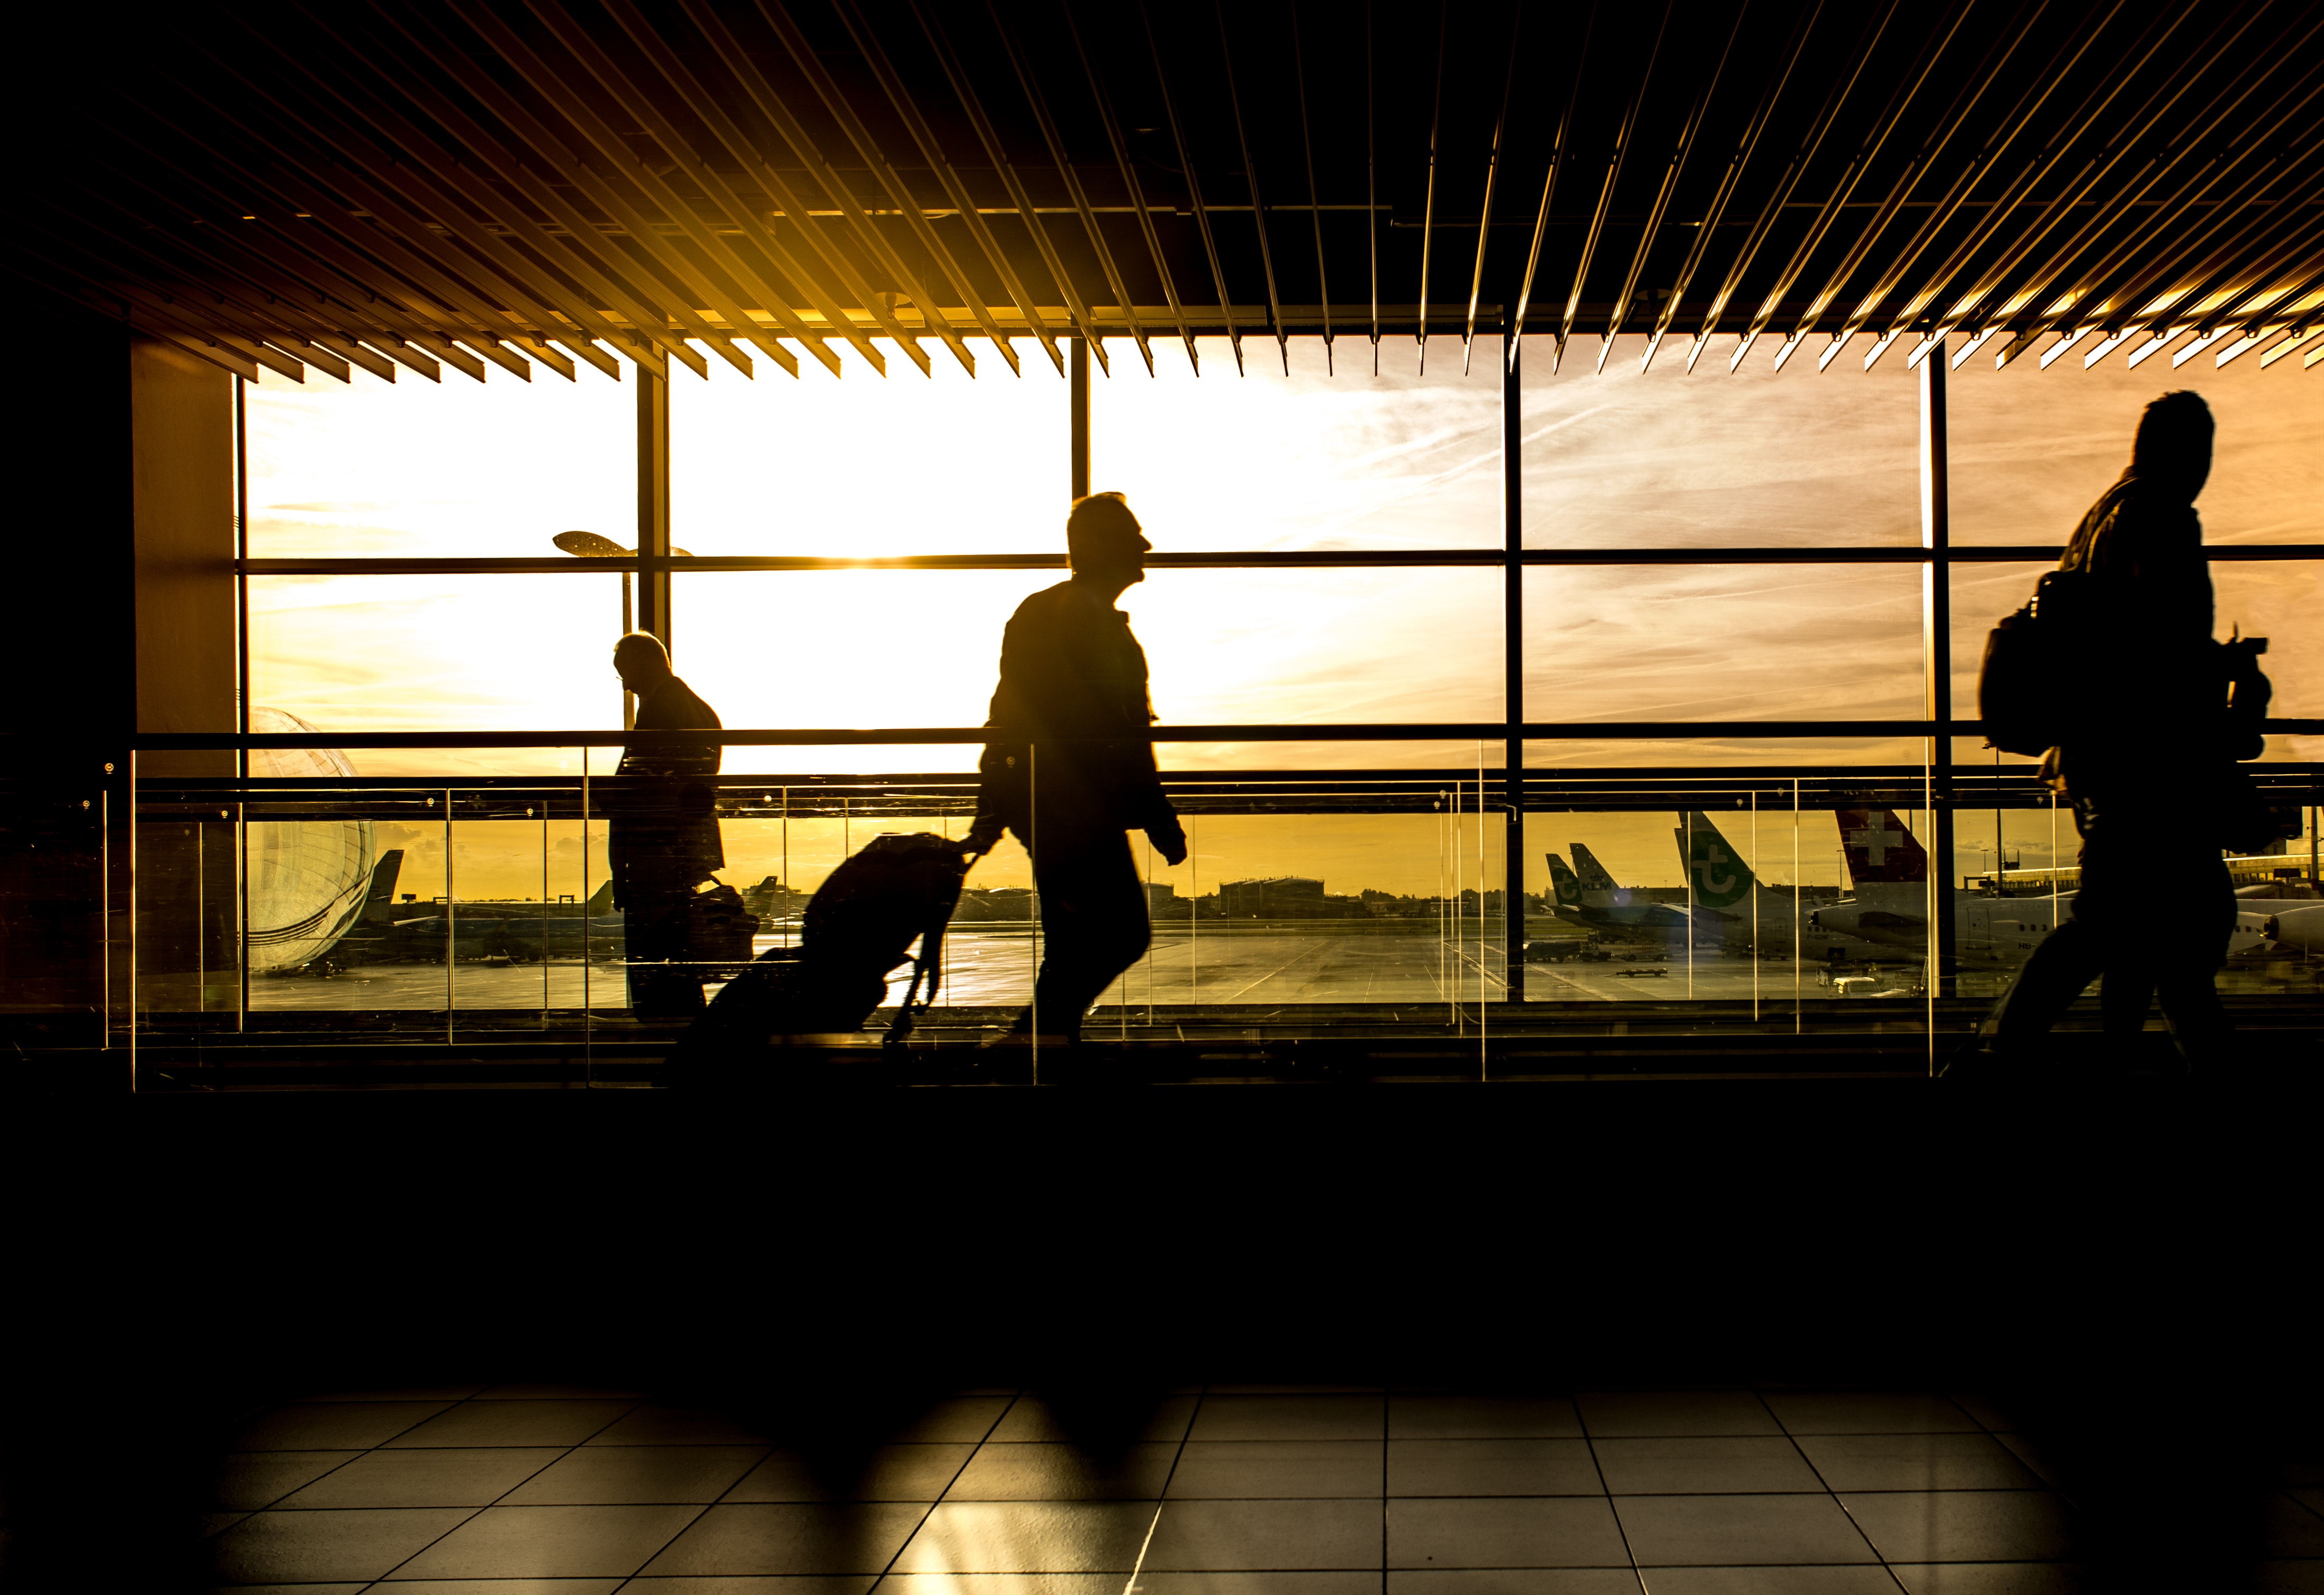 Silhouette of person in airport photo